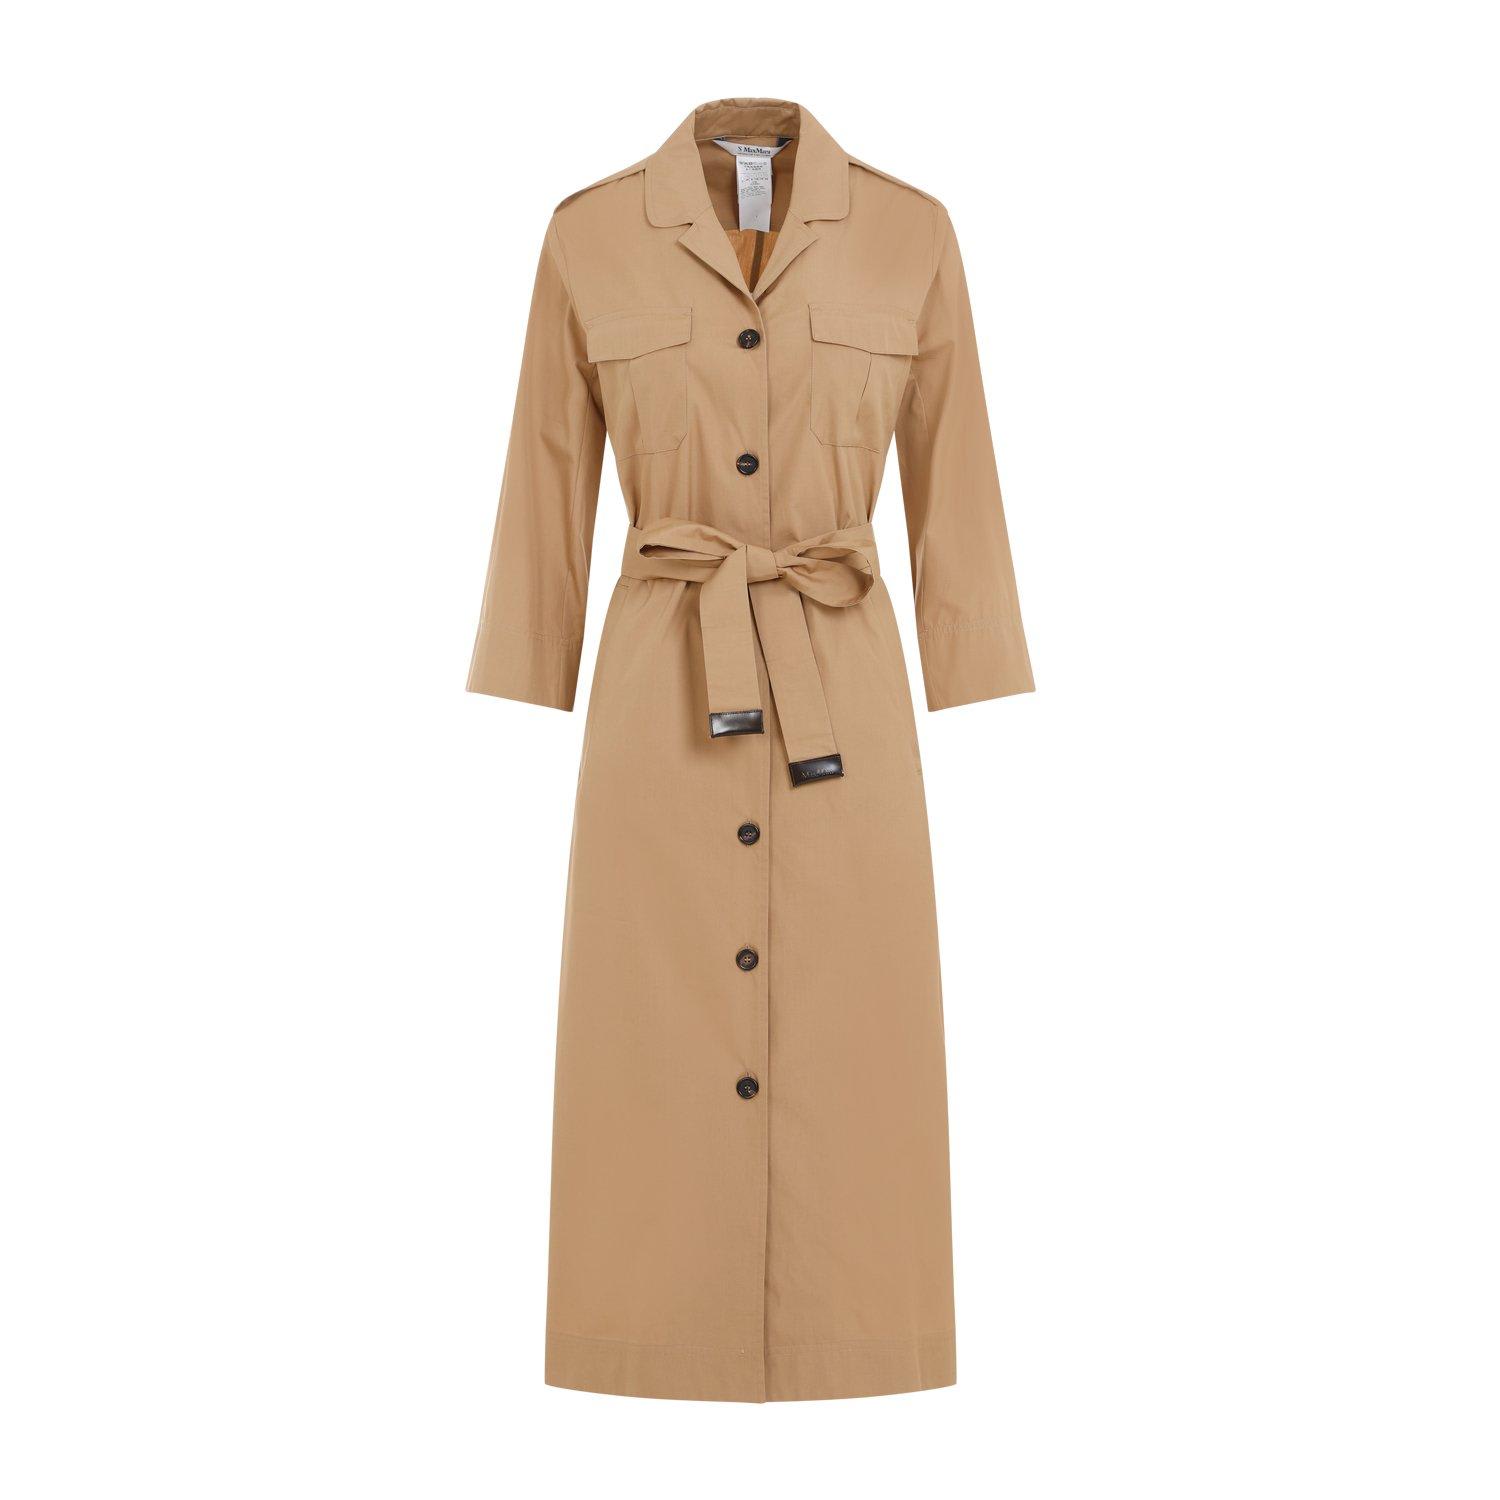 Shop 's Max Mara Buttoned Belted Dress In Beige